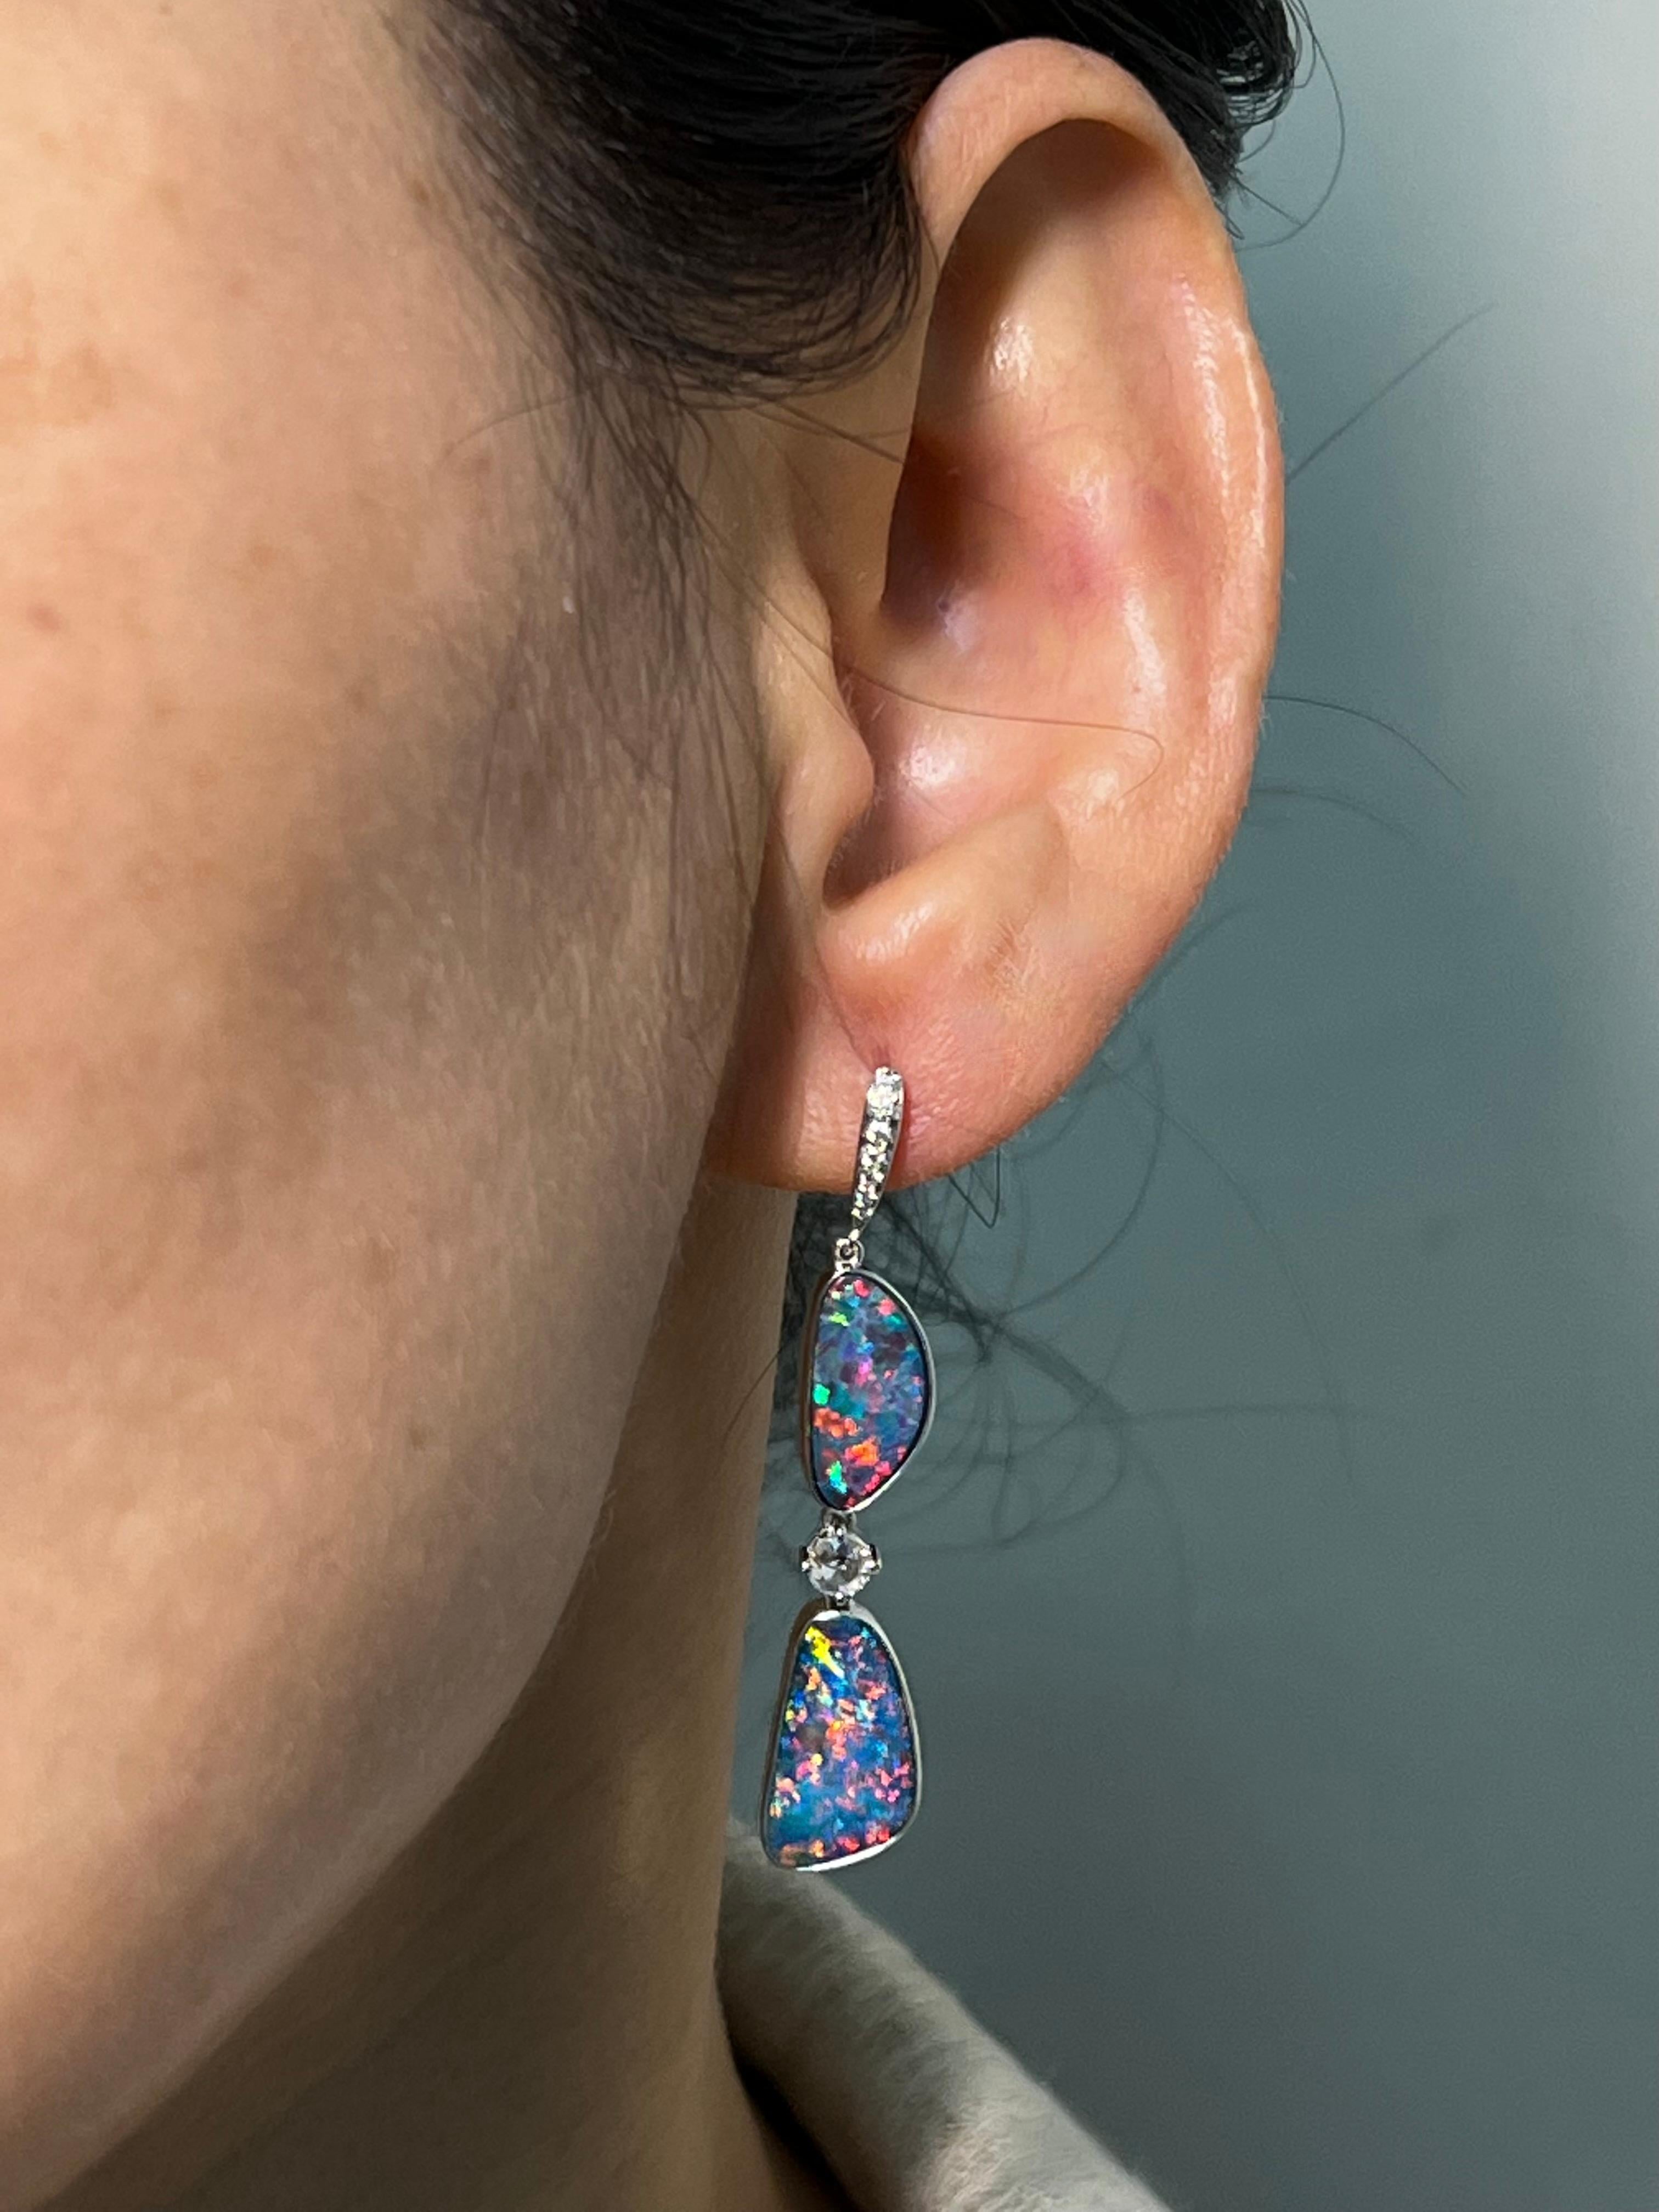 Please check out the HD video! These are Australian doublet Opals! When it comes to opals, one of the most important character people look for is the play of color. The Australian opals in these earrings have superb play of color. Its got all the